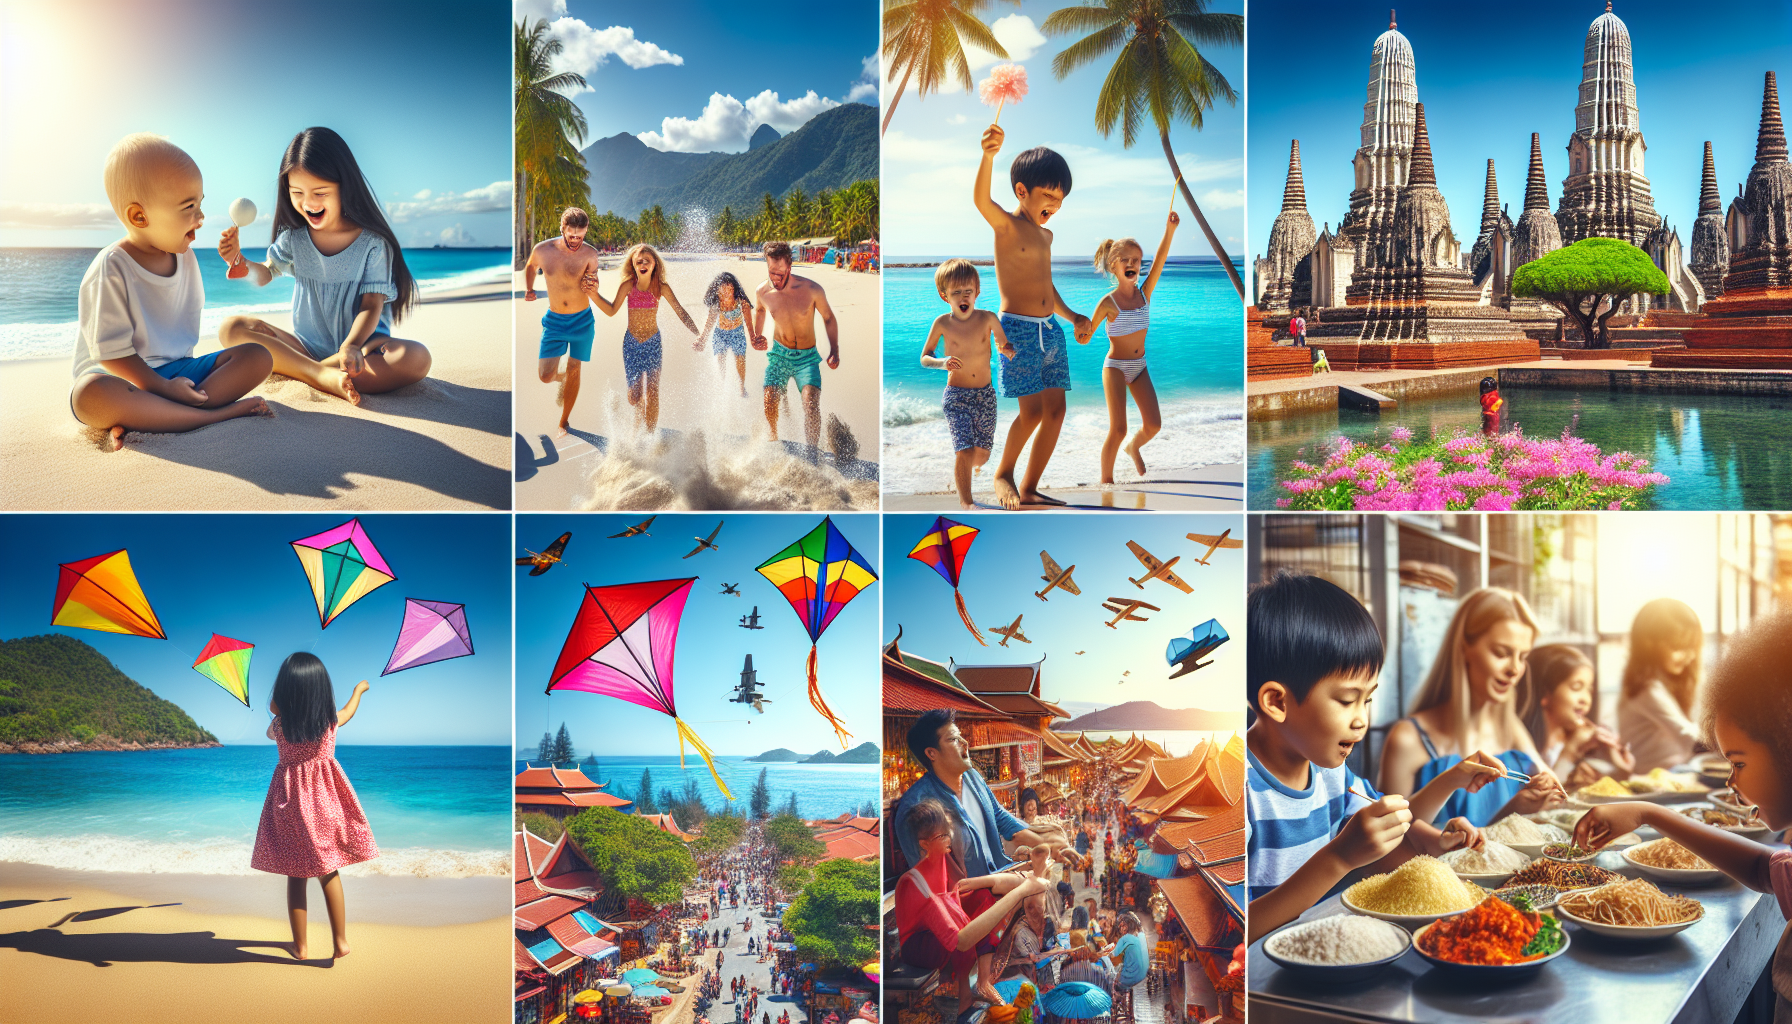 discover the best fun activities for kids in asia and find out where to go on vacation with your family. from thrilling amusement parks to cultural experiences, asia offers a wide range of exciting options for a memorable family getaway.